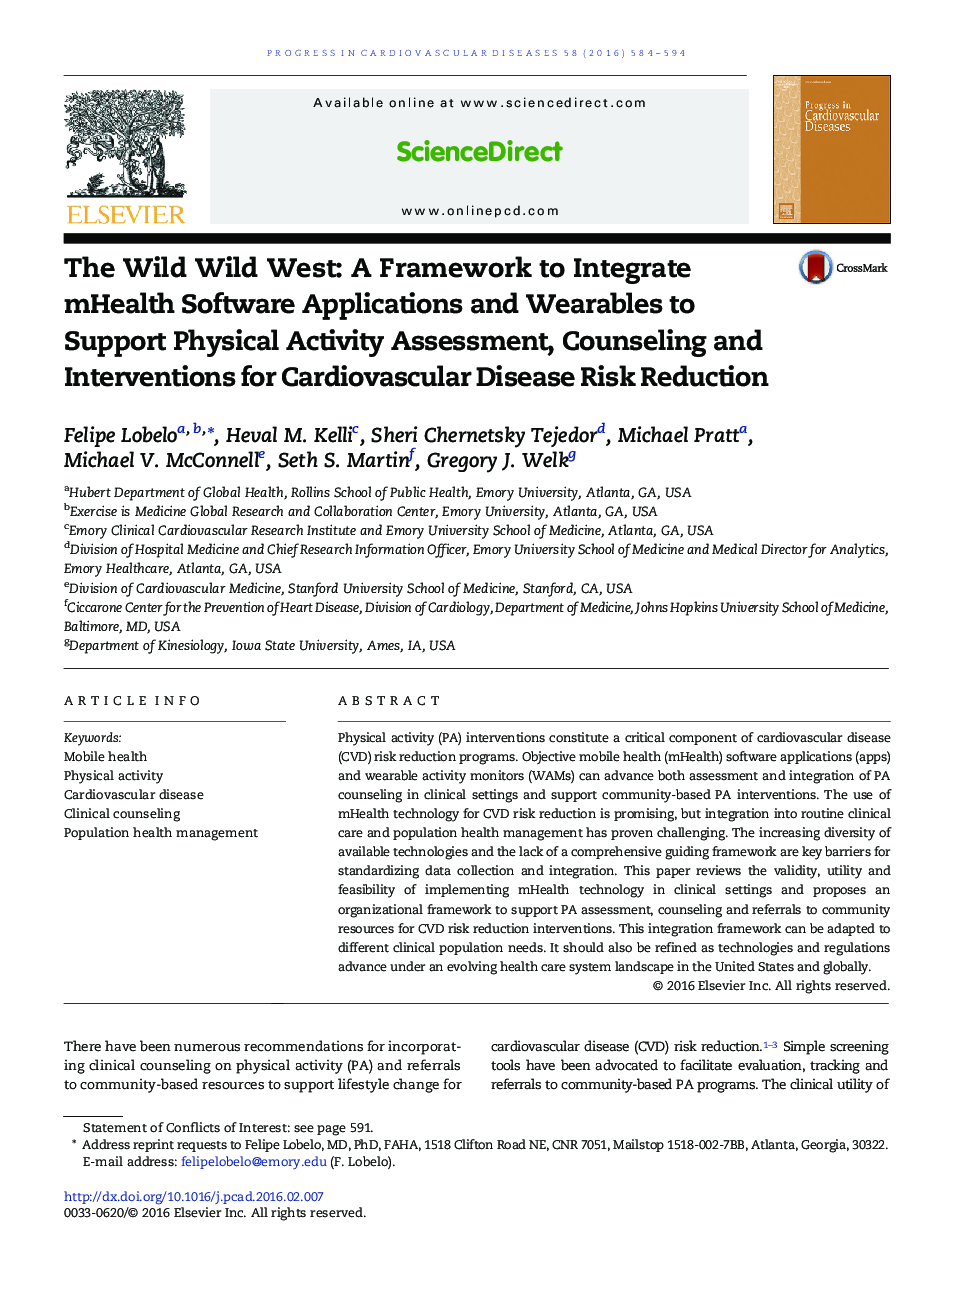 The Wild Wild West: A Framework to Integrate mHealth Software Applications and Wearables to Support Physical Activity Assessment, Counseling and Interventions for Cardiovascular Disease Risk Reduction 